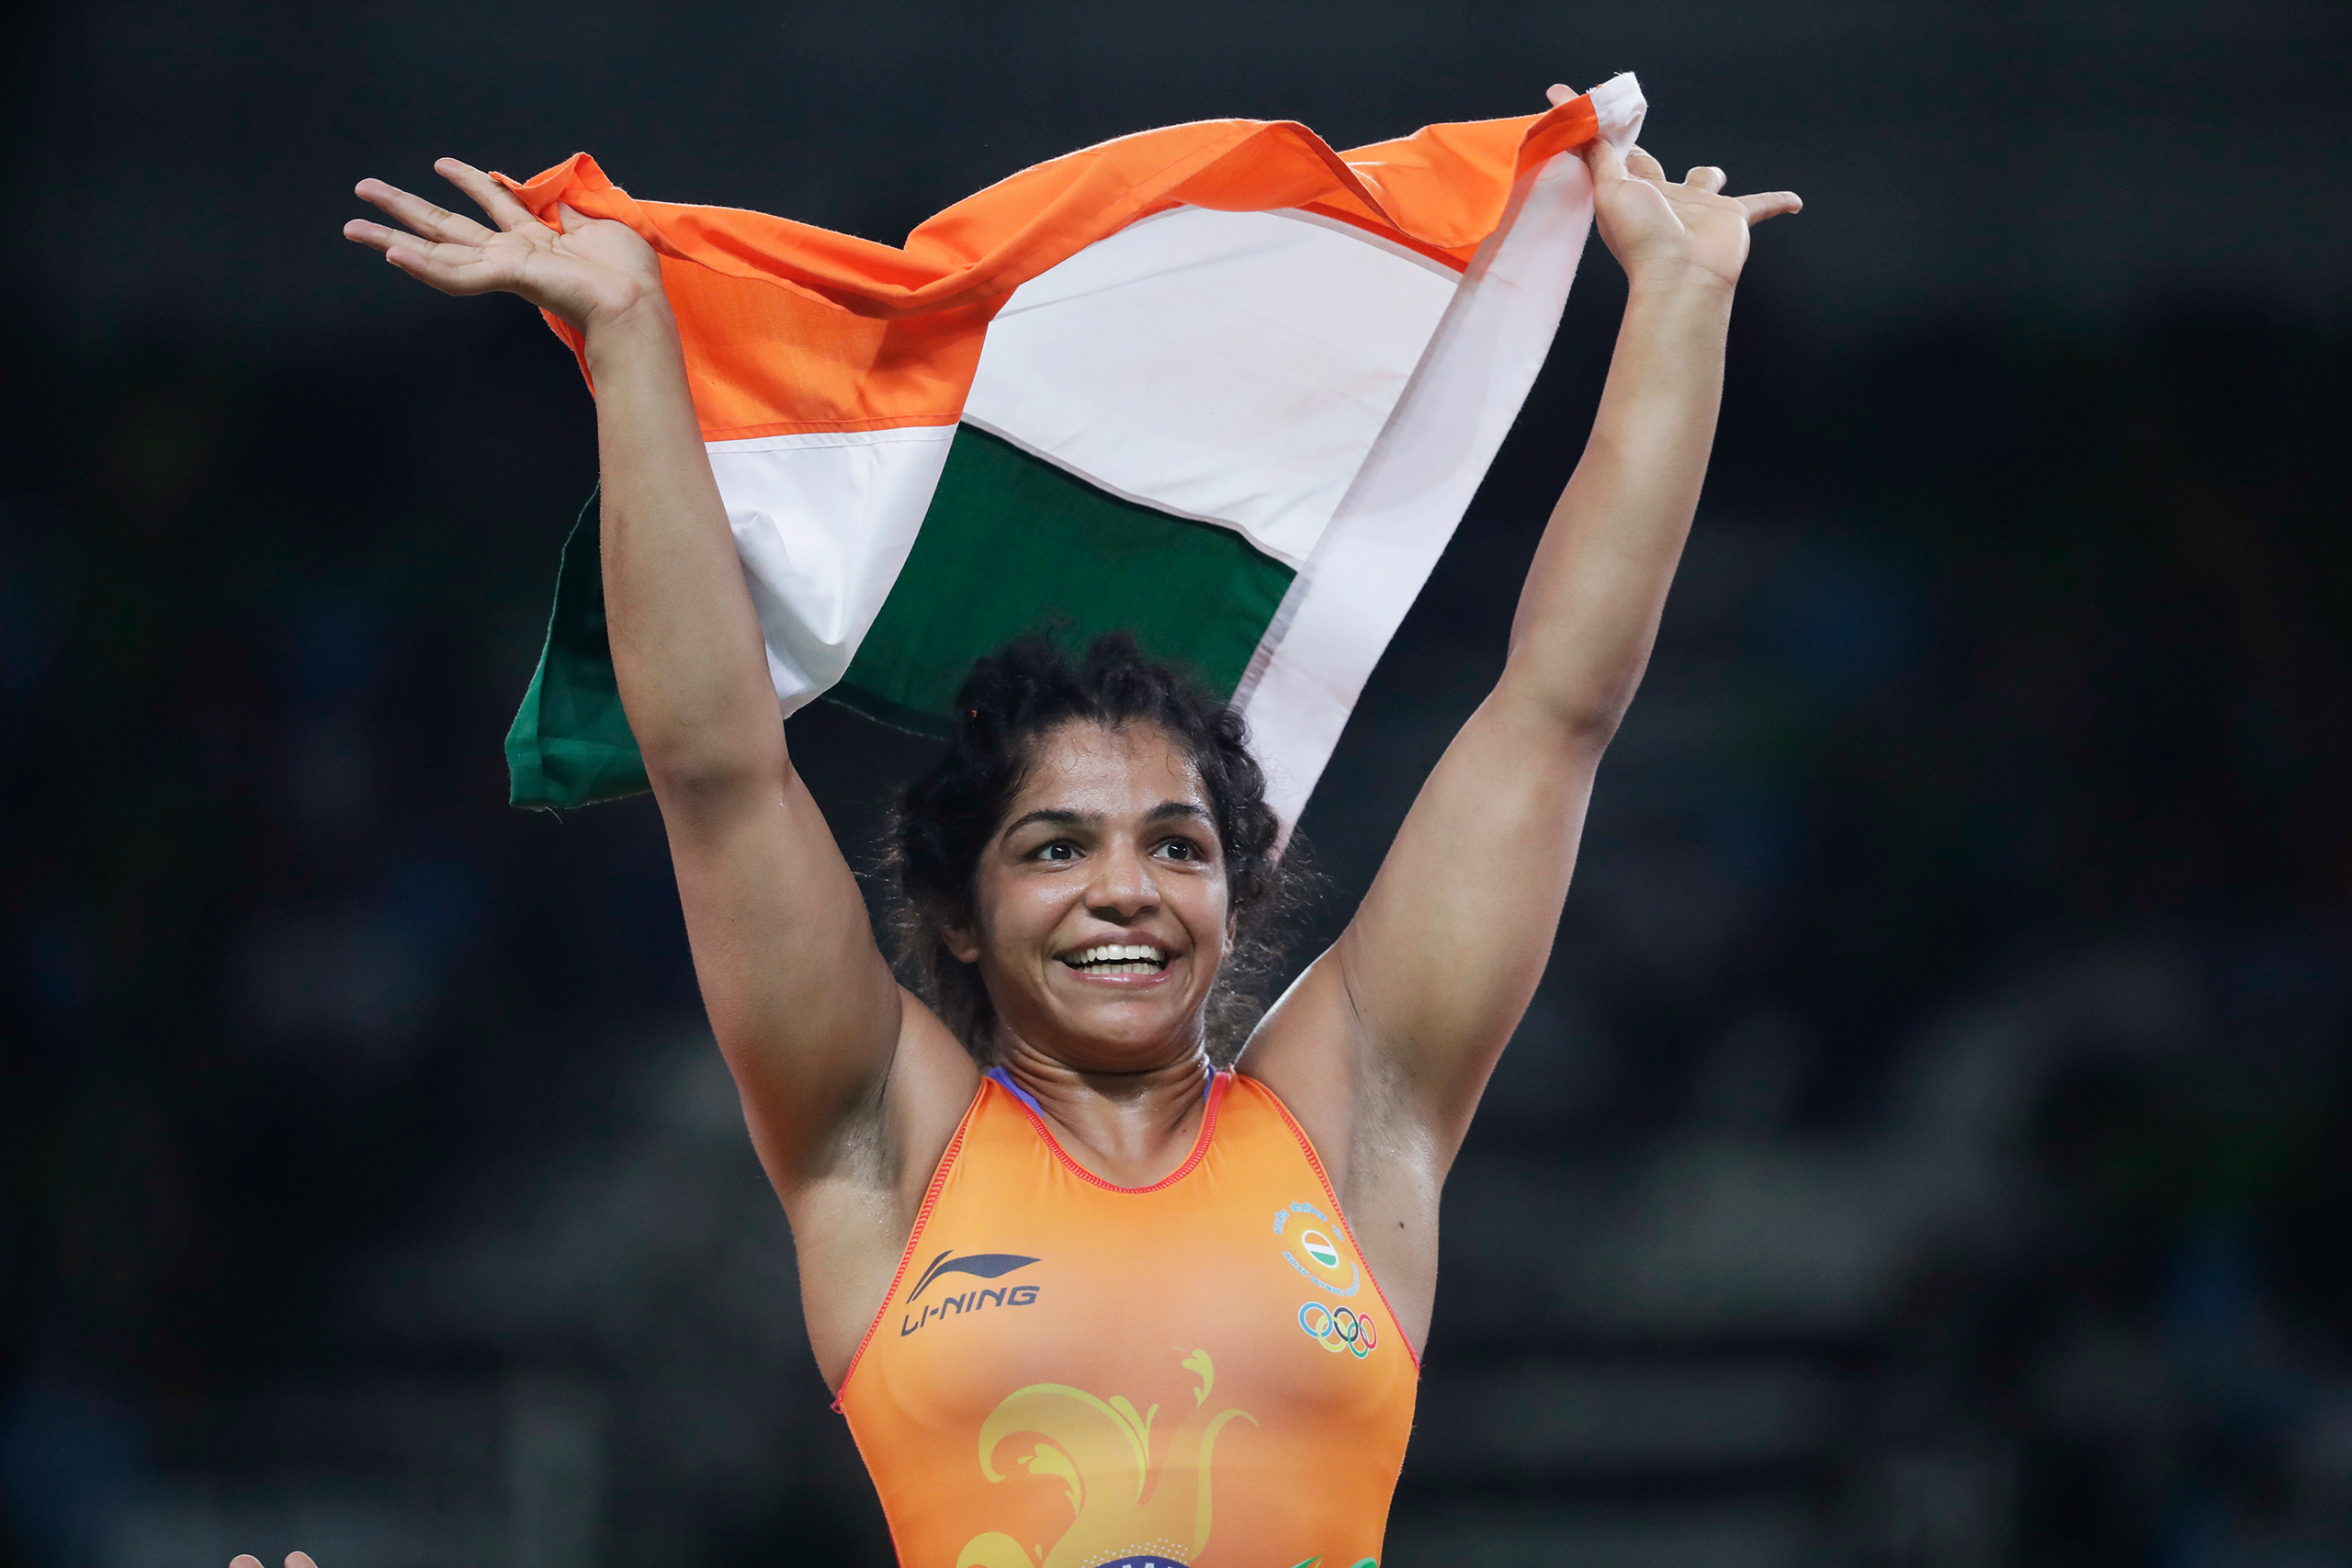 India's Sakshi Malik reacts after winning bronze against Kyrgyzstan's Aisuluu Tynybekova in the women's wrestling freestyle 58-kg competition at the 2016 Summer Olympics in Rio de Janeiro on Aug. 17, 2016. (Markus Schreiber—AP)